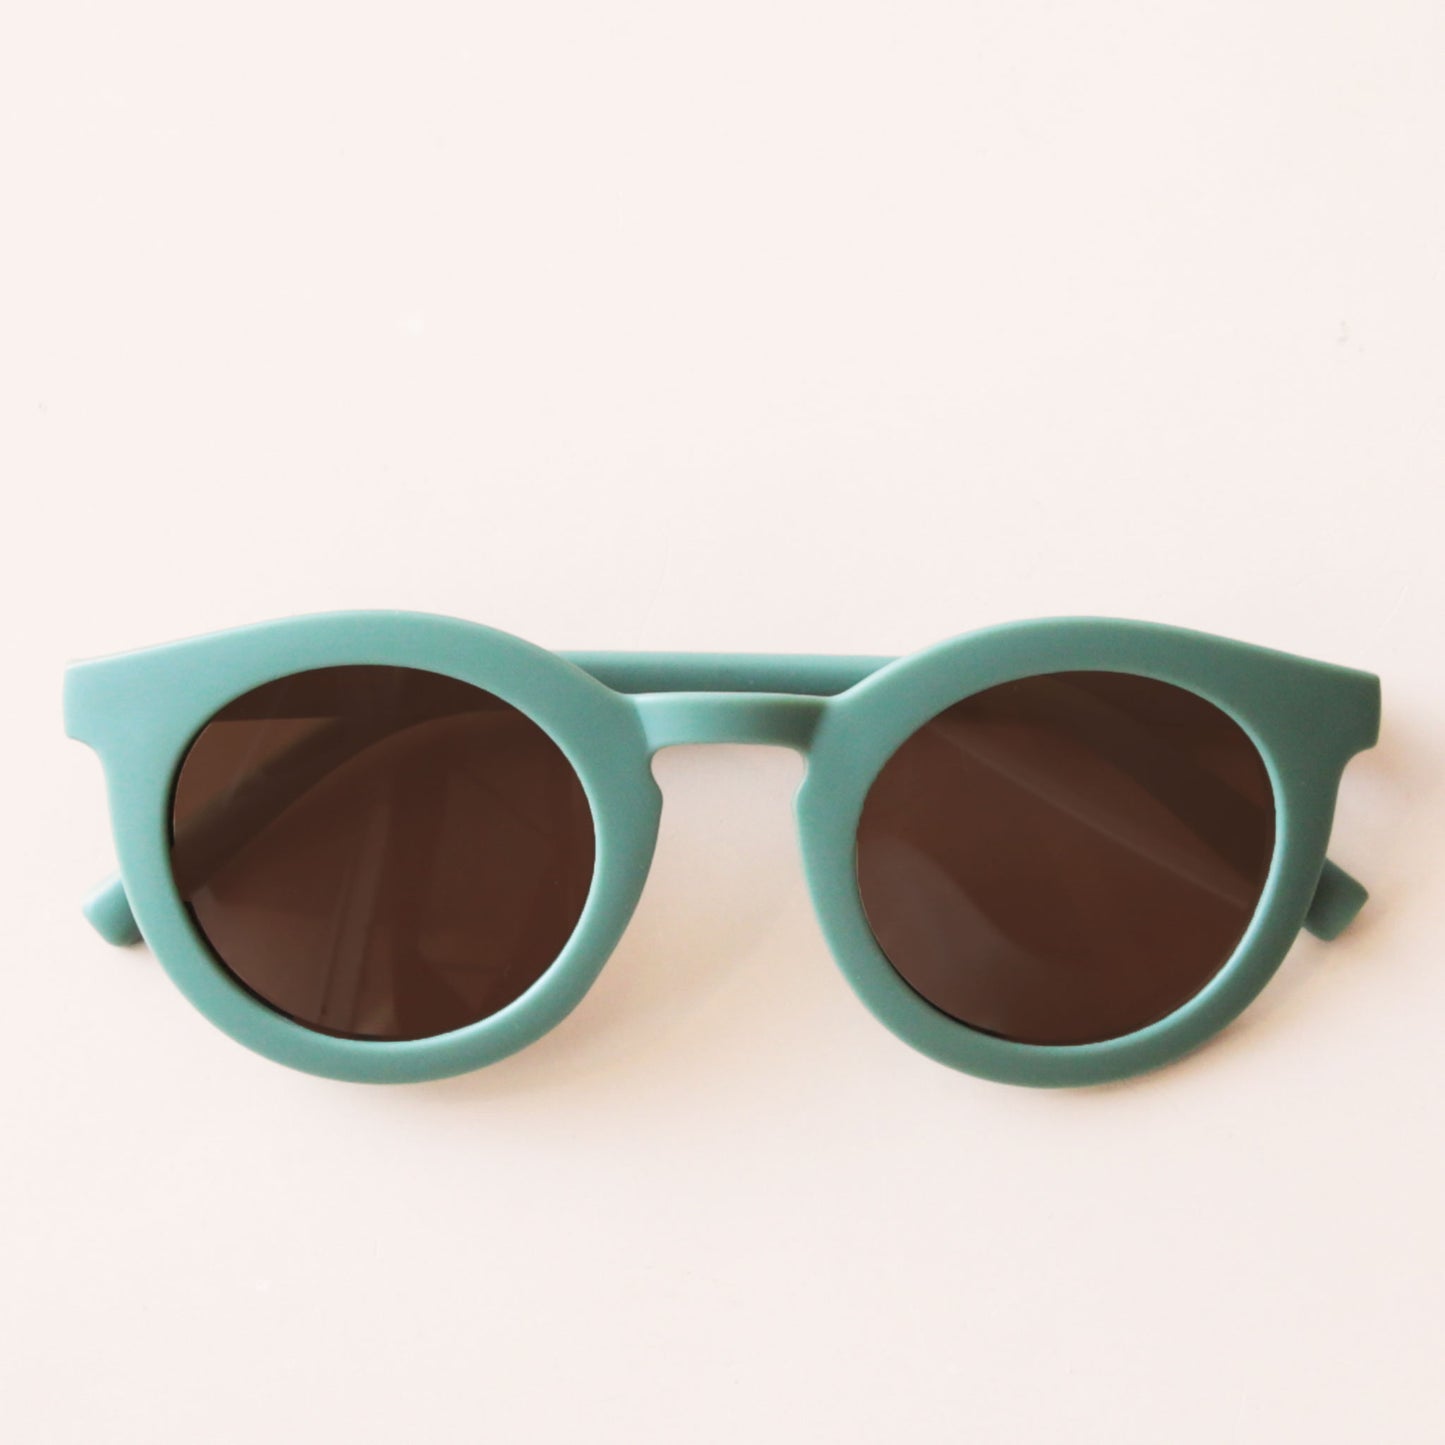 On a neutral background is a green pair of circle shape children's sunglasses.